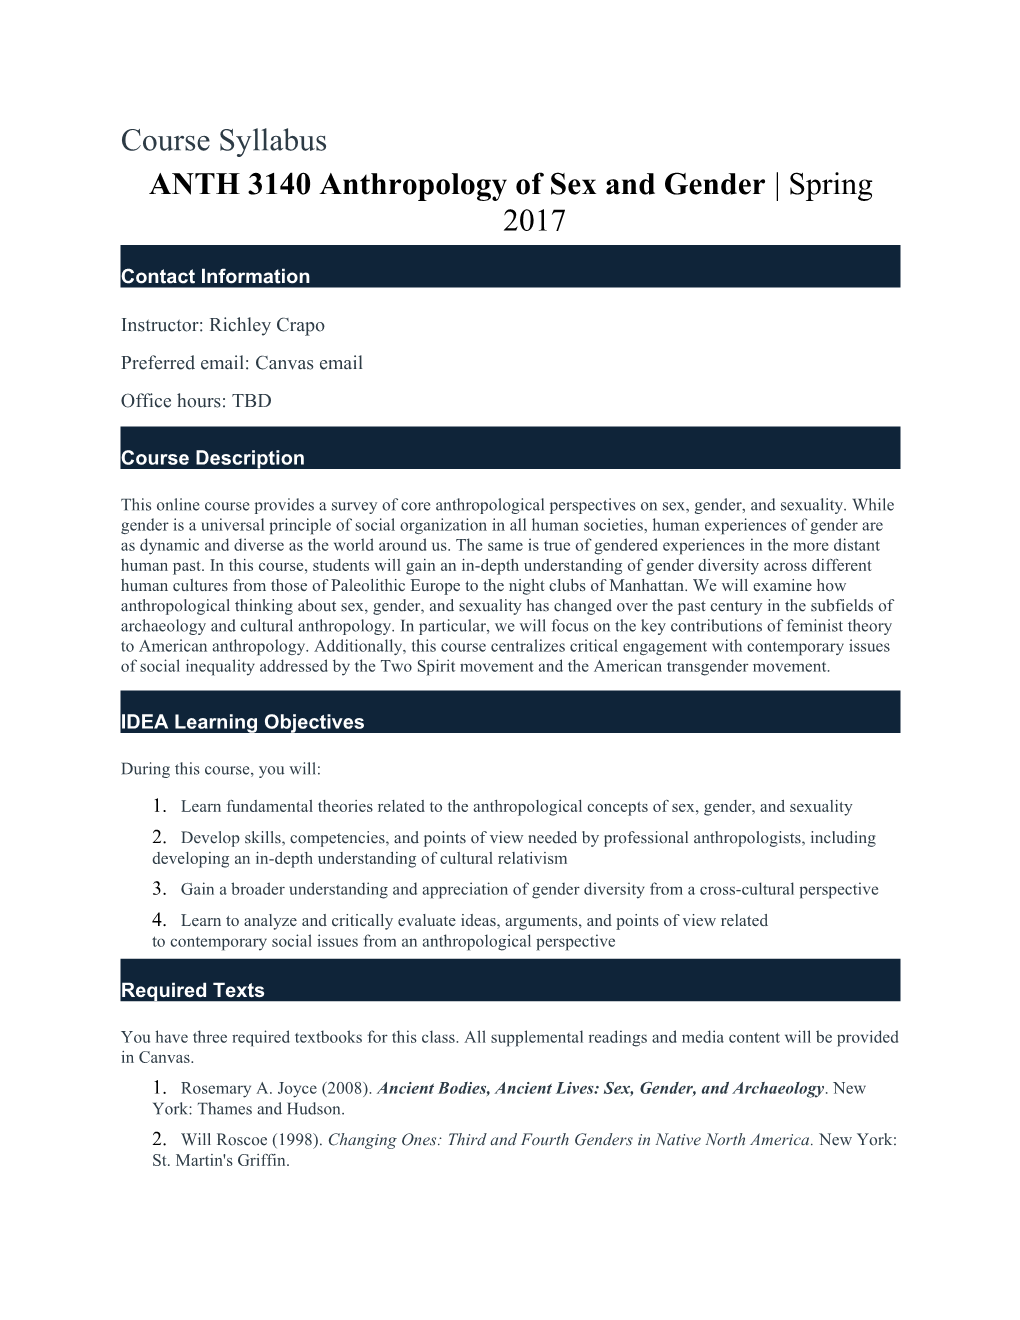 ANTH 3140 Anthropology of Sex and Gender Spring 2017